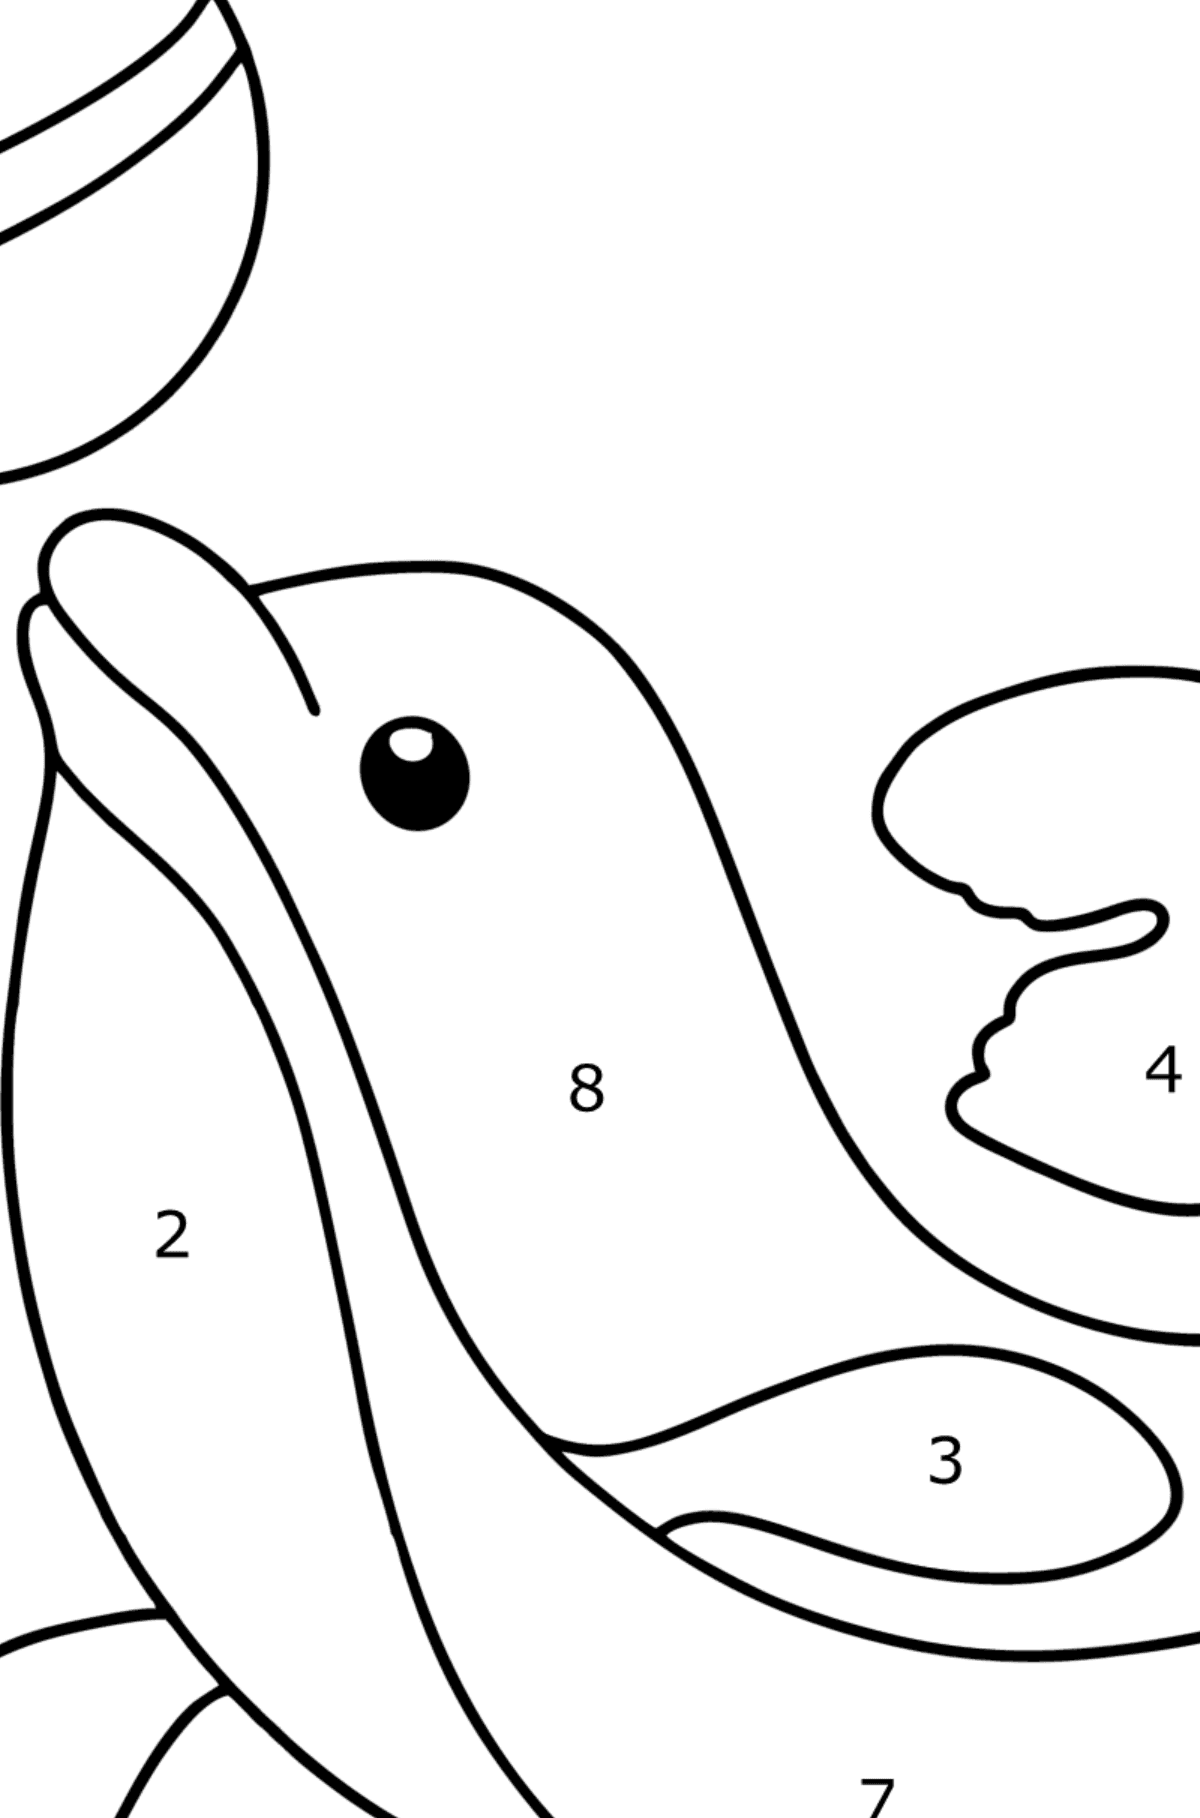 Dolphin is Performing coloring page - Coloring by Numbers for Kids